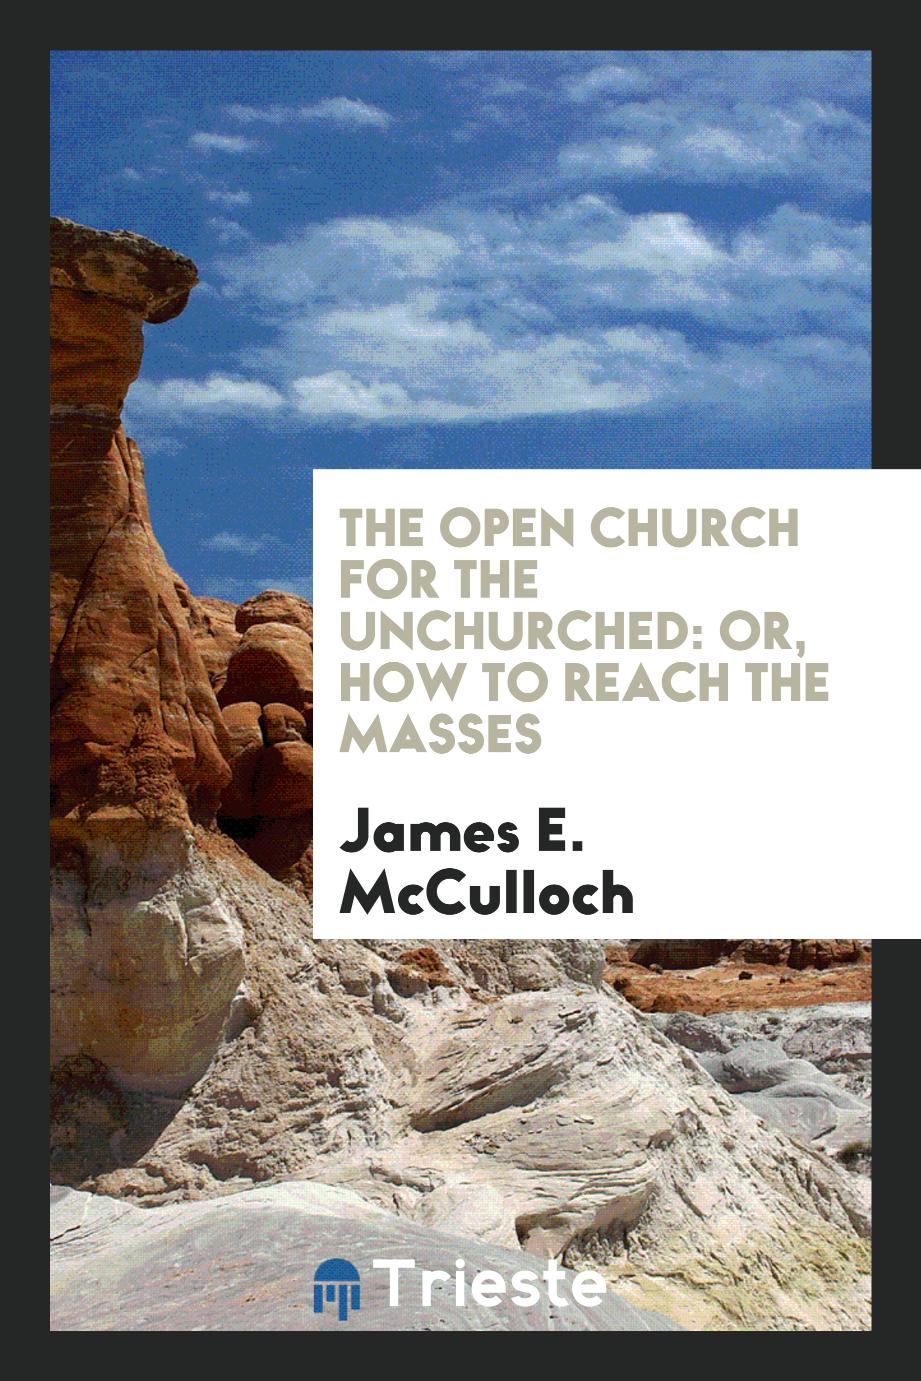 The Open Church for the Unchurched: Or, How to Reach the Masses